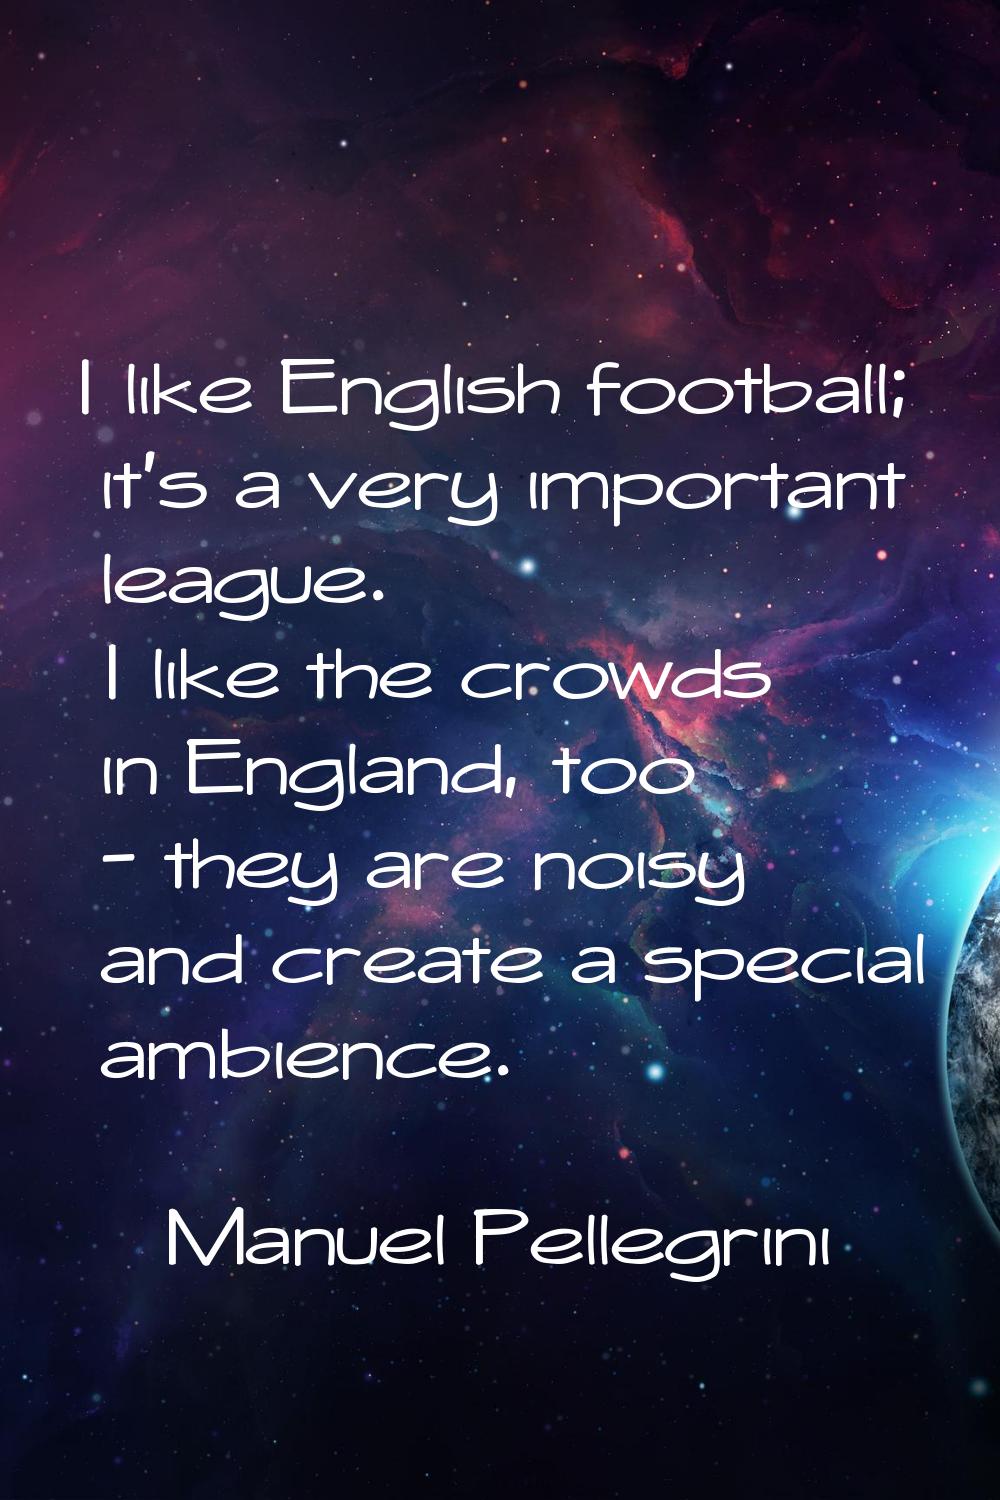 I like English football; it's a very important league. I like the crowds in England, too - they are